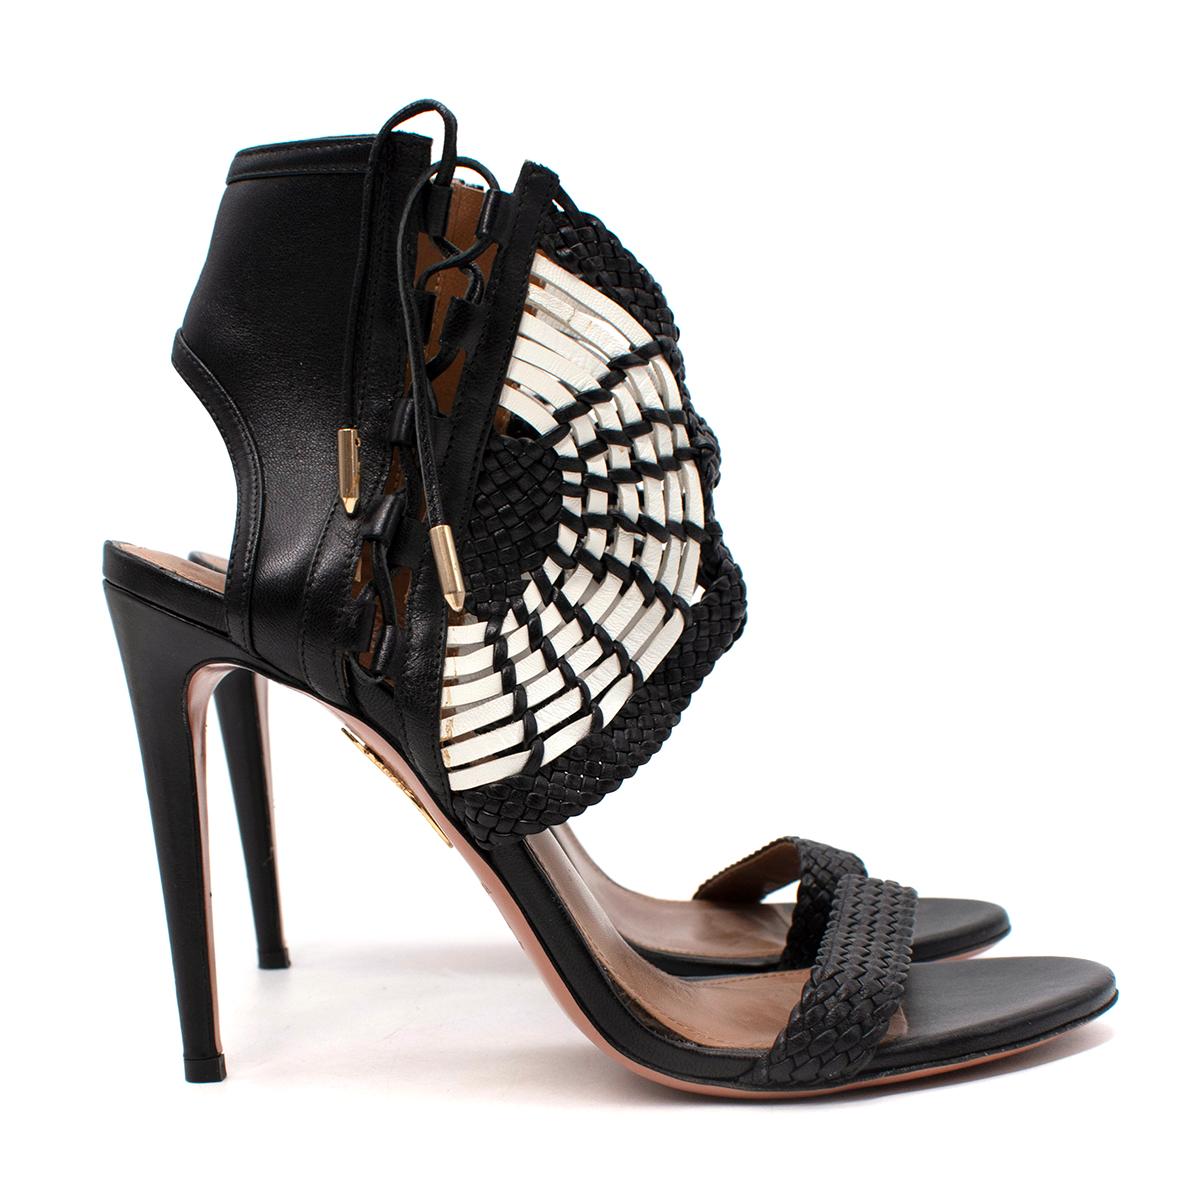 Aquazzura Black & White Leather Braided Heeled Sandals

- Round shaped toe heeled sandals with braided leather fan effect detail on the ankle
- Side ankle zip
- Set on a high stiletto heel
- Lined in tan brown leather

Materials
Leather

Made In